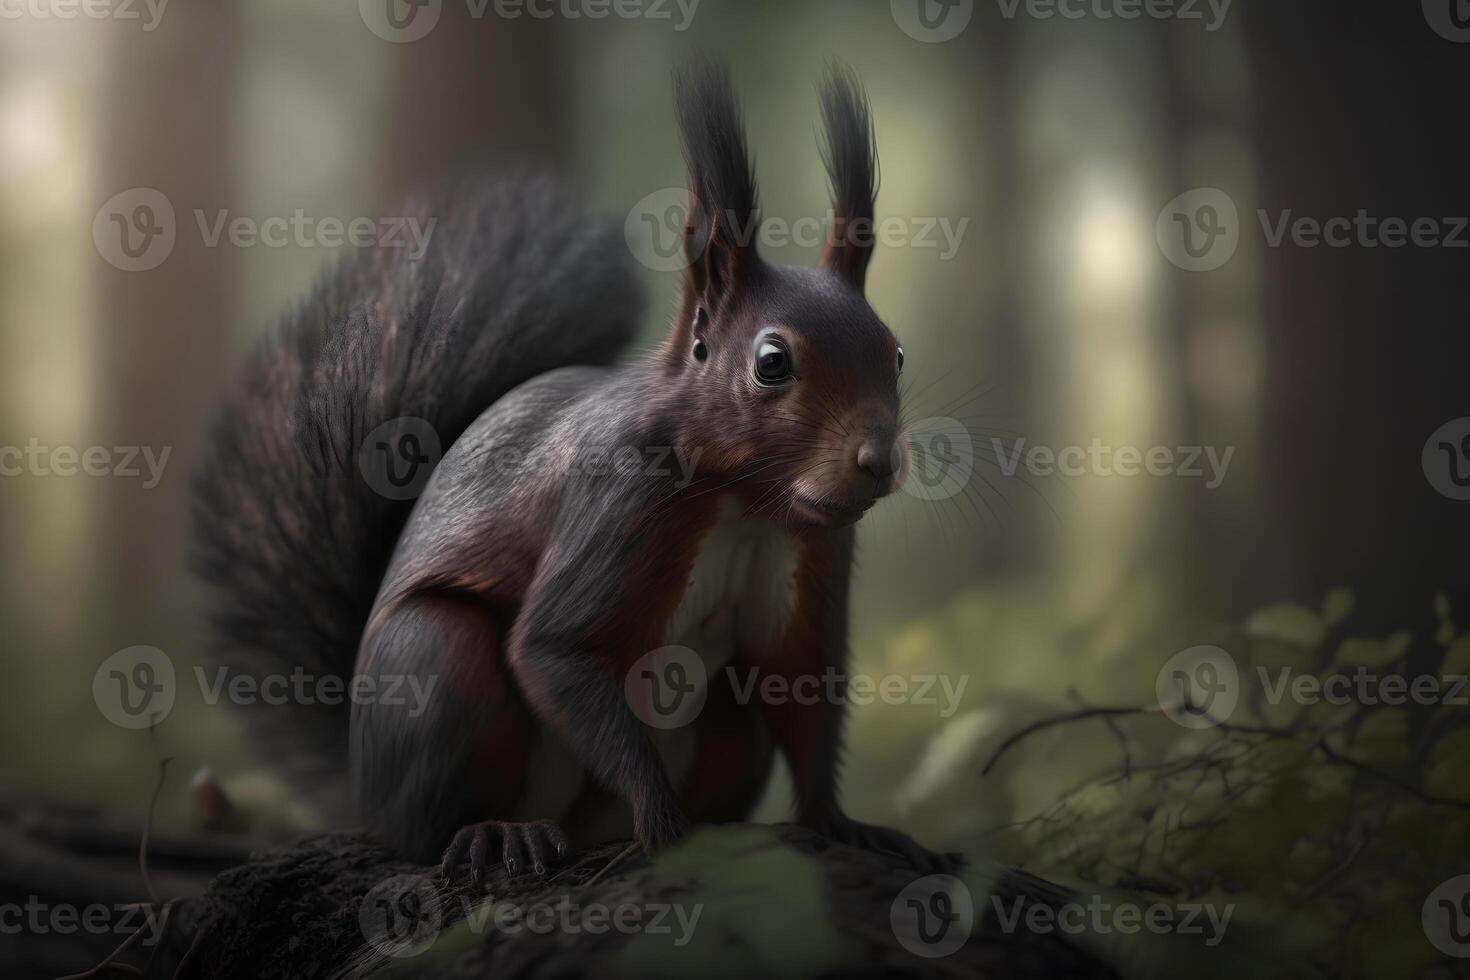 Art view on wild nature. Cute red squirrel. Neural network photo